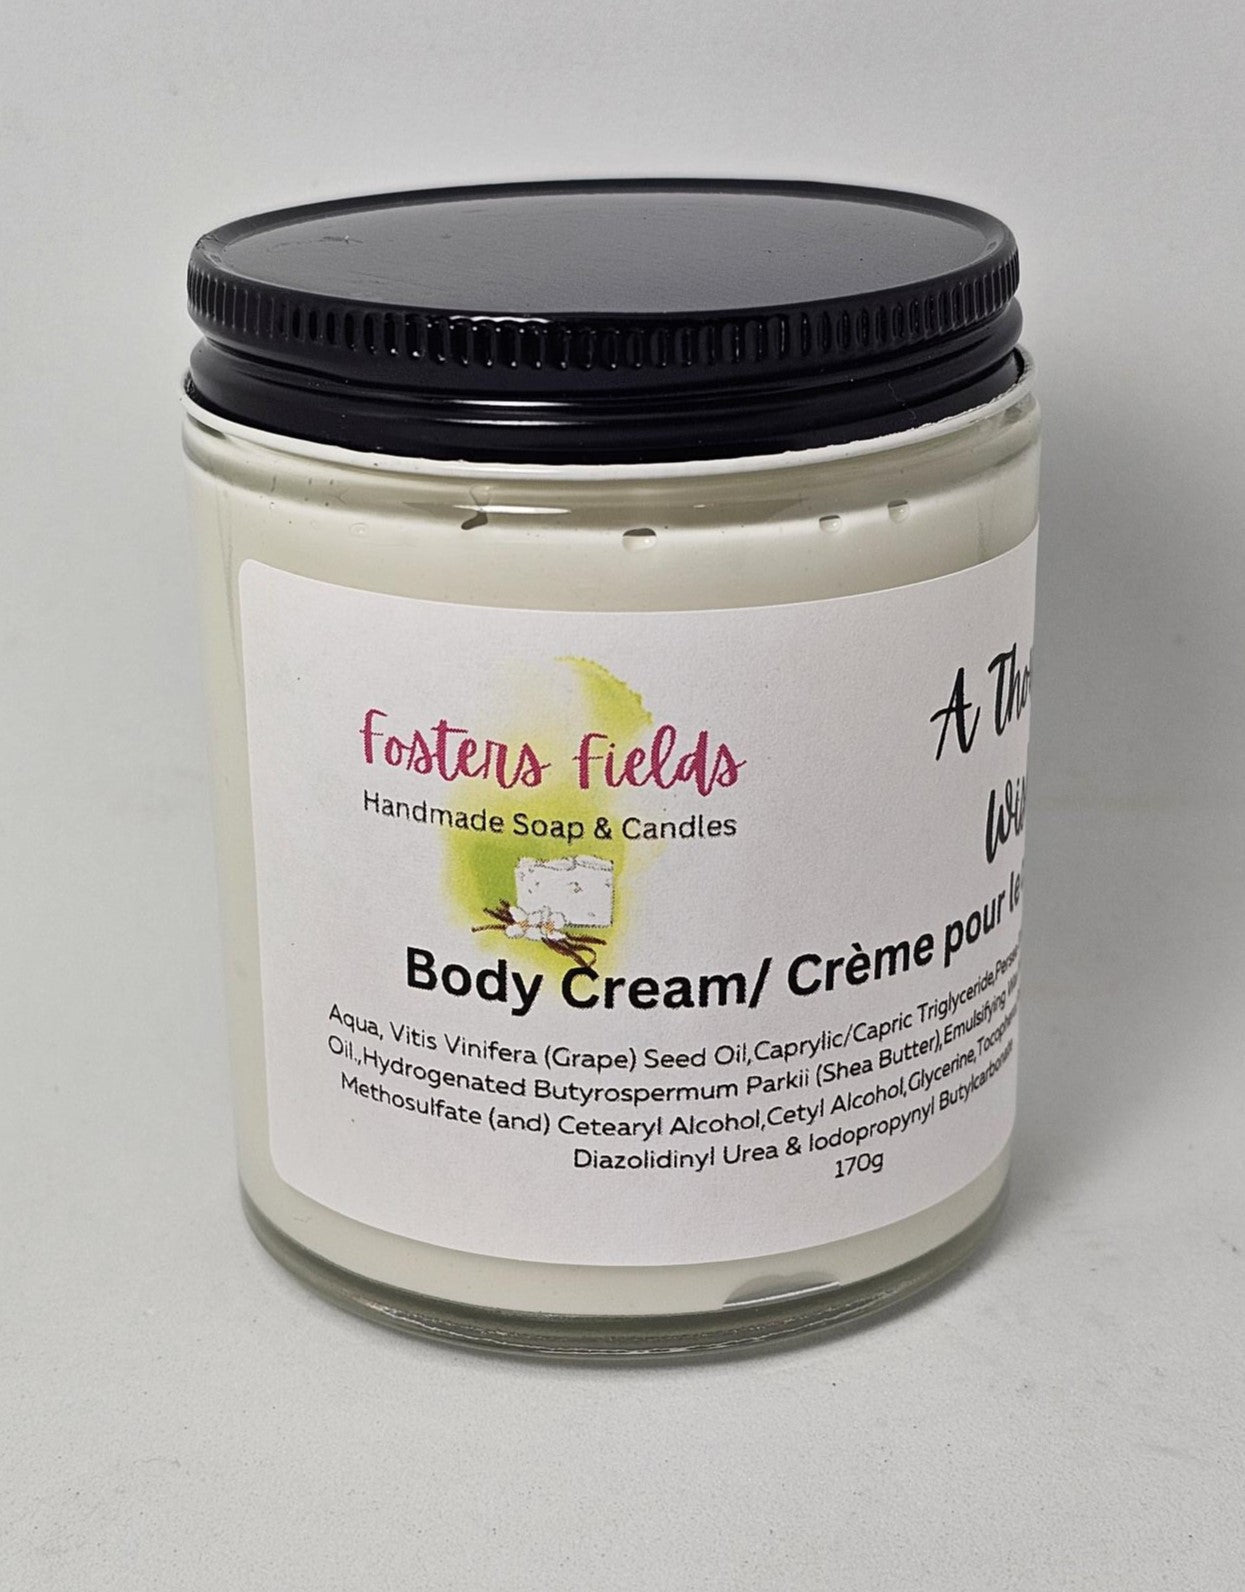 A Thousand Wishes Body Cream - FostersFieldssoap#soycandles#fostersfields#handmadesoap#natural soapscented body creamA Thousand Wishes Body Cream